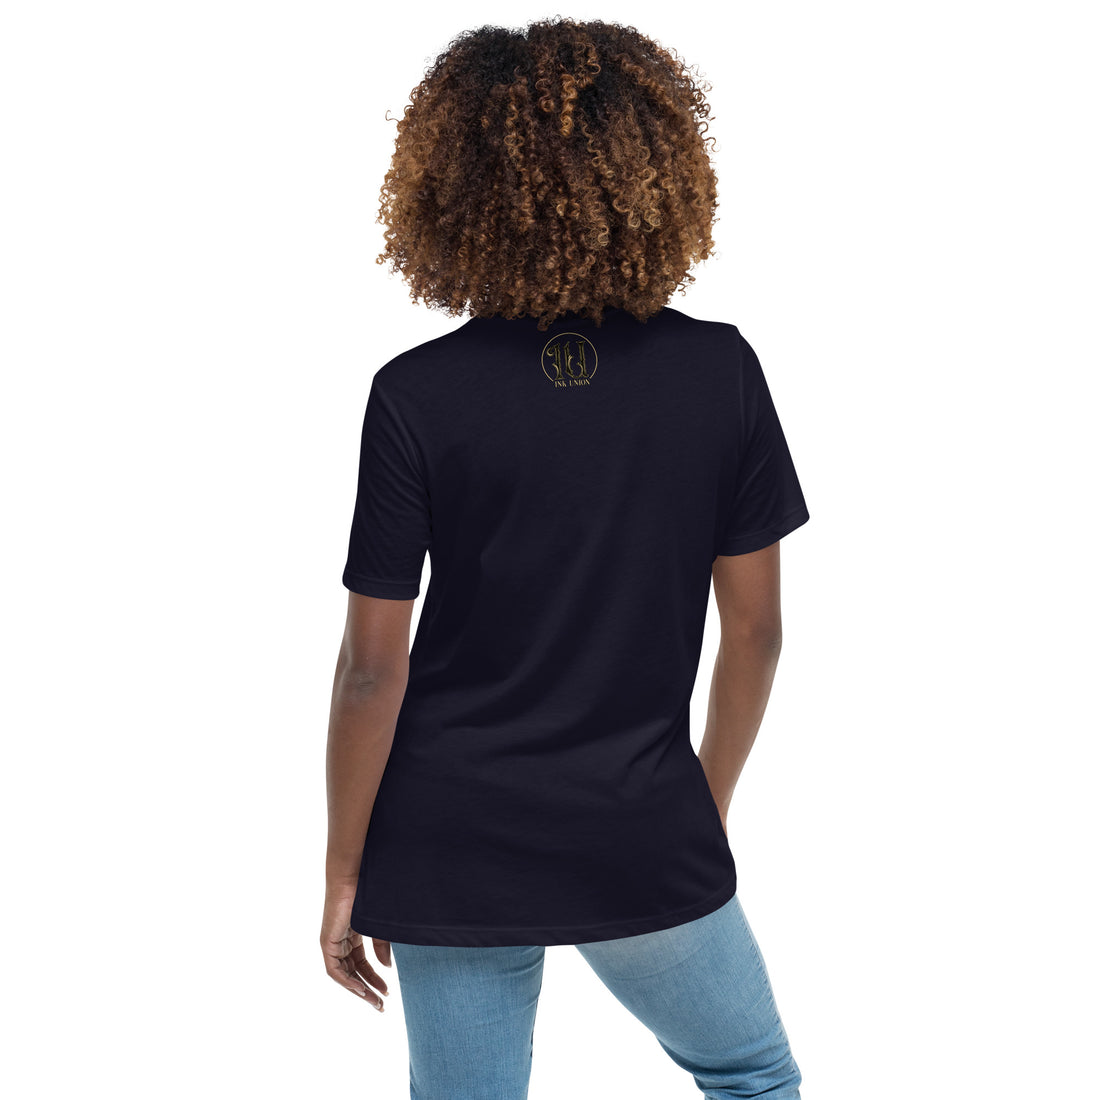 The back of an attractive woman wearing a navy blue t-shirt with a small gold and black Ink Union ring Logo centered just under the neckline.